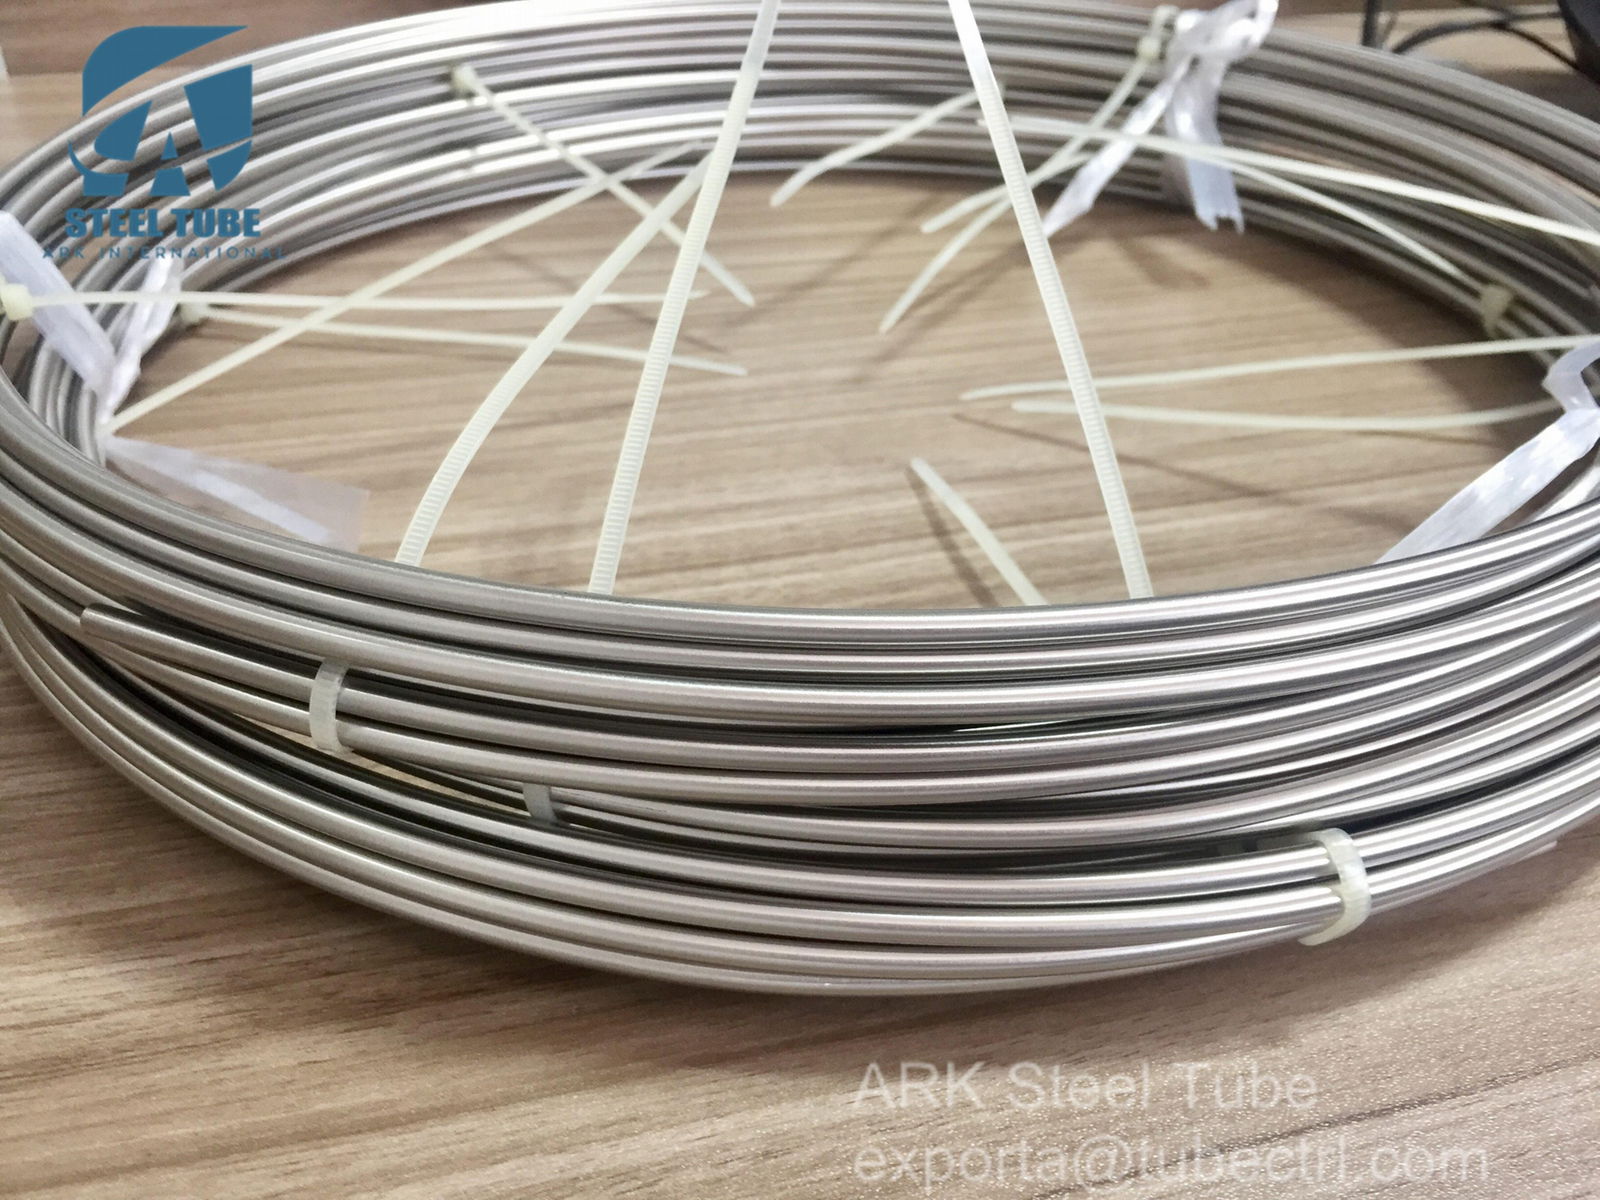 ASTM A312 TP304L TP316L Small Diameter Seamless Stainless Steel Tube Coil Tubing 2